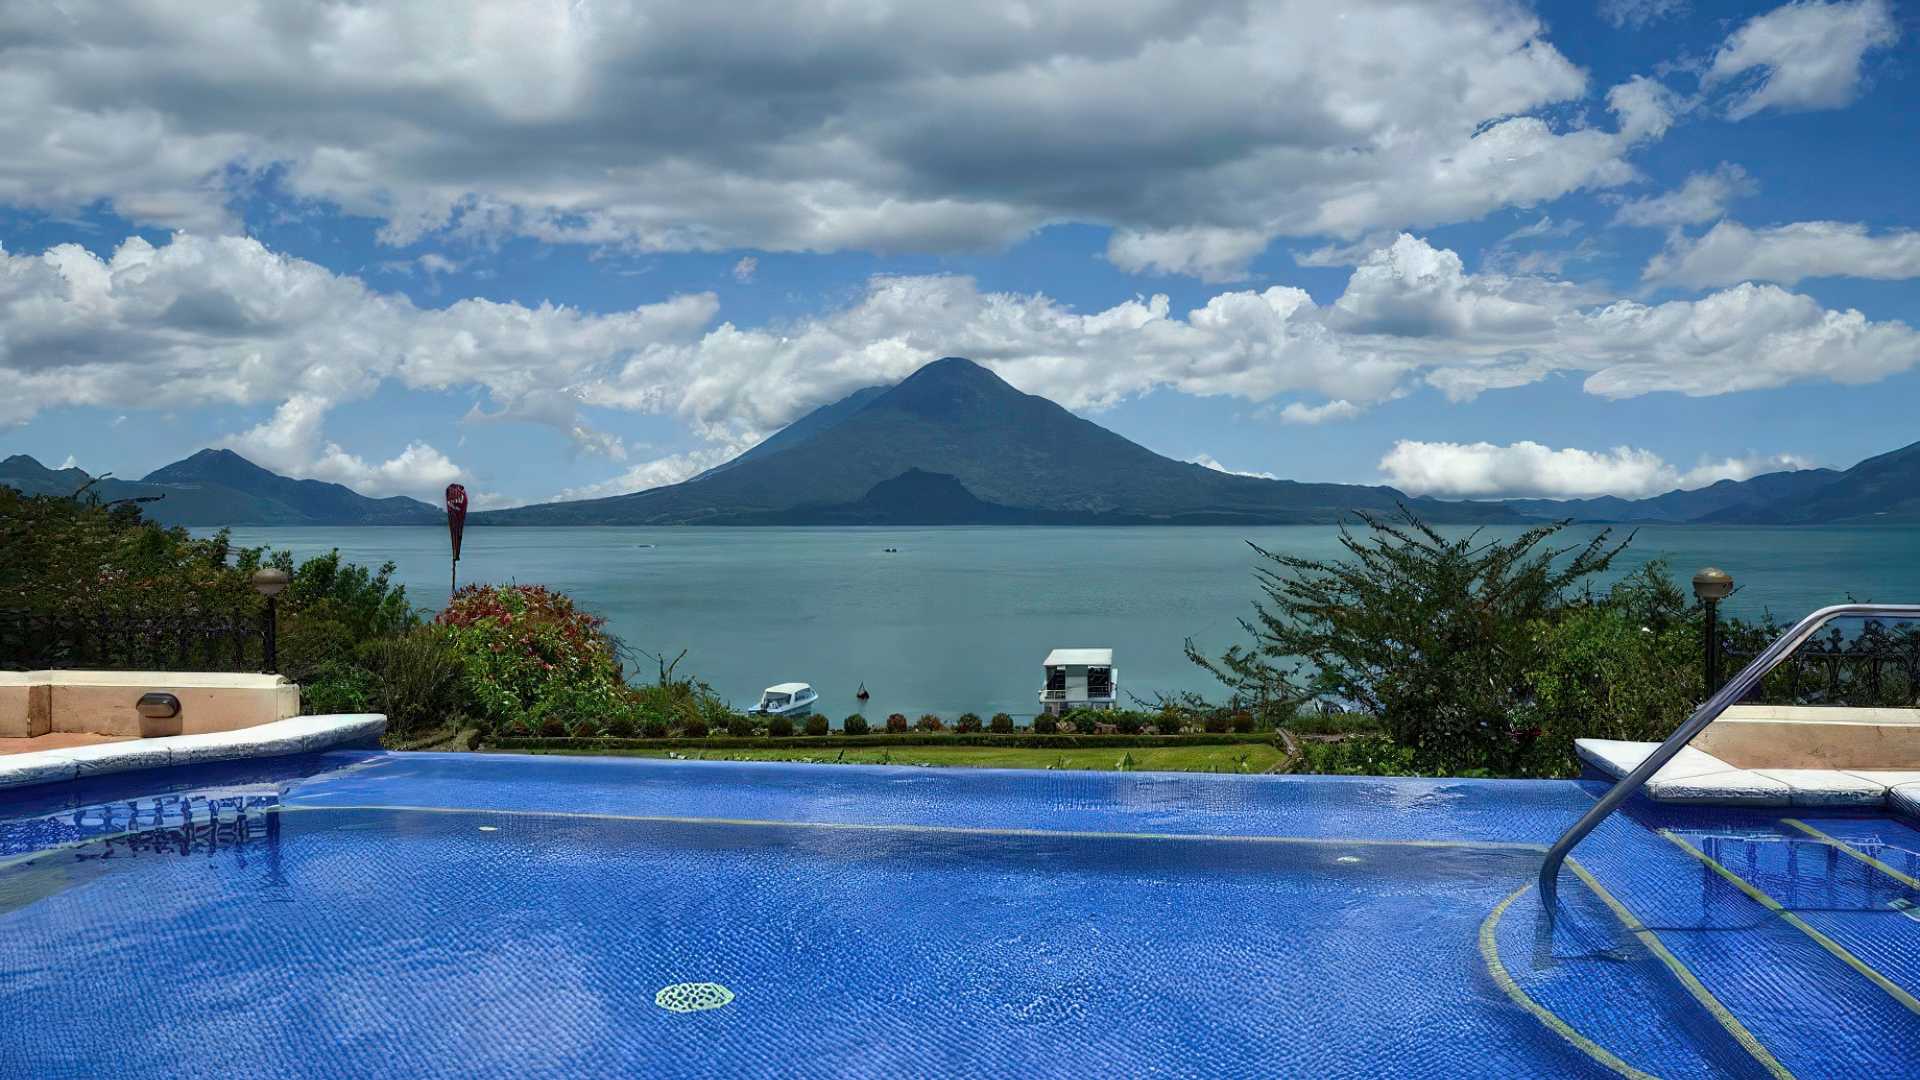 The breathtaking view of Lake Atitlan's serene waters and surrounding landscape is captured from the vantage point of the hotel's inviting swimming pool.